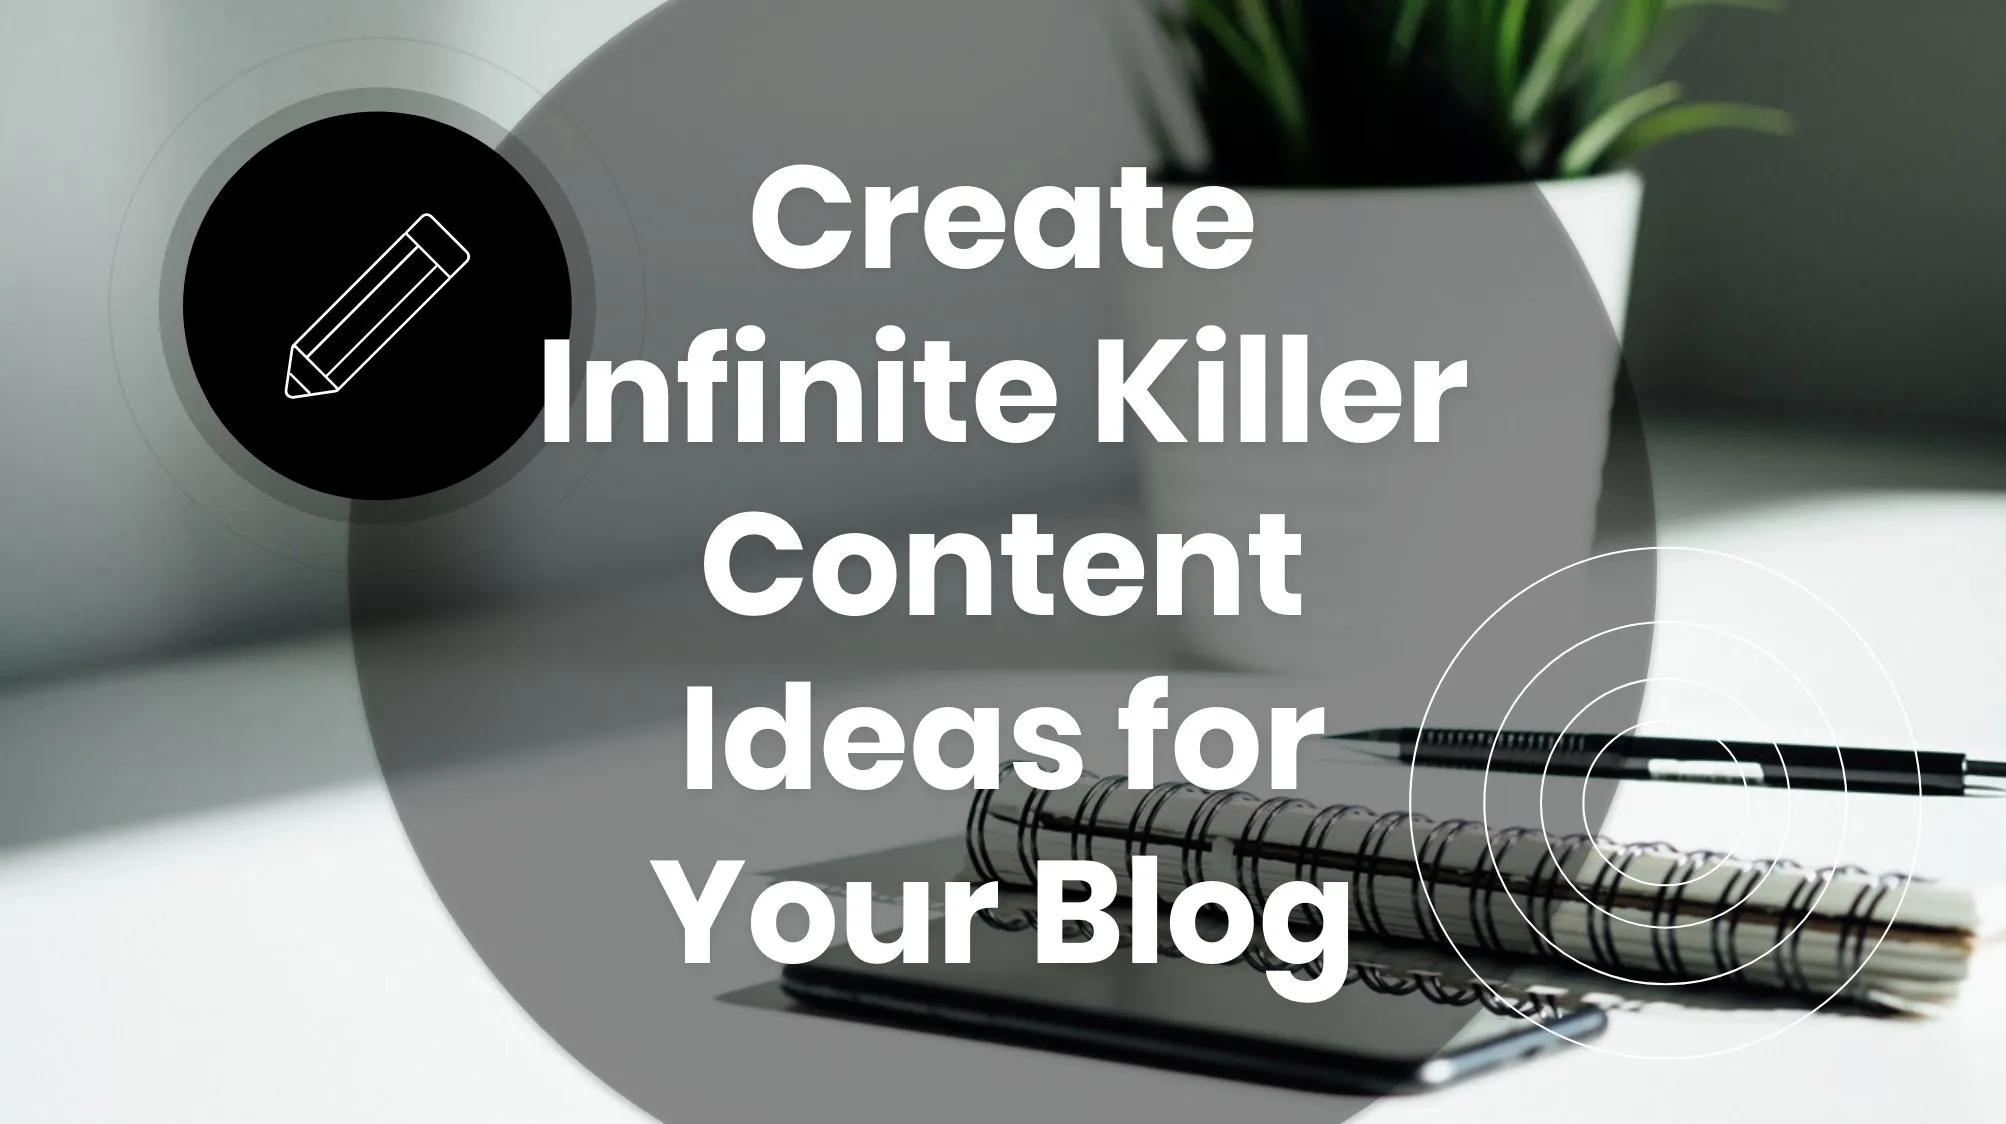 Create Infinite Killer Content Ideas for Your Blog